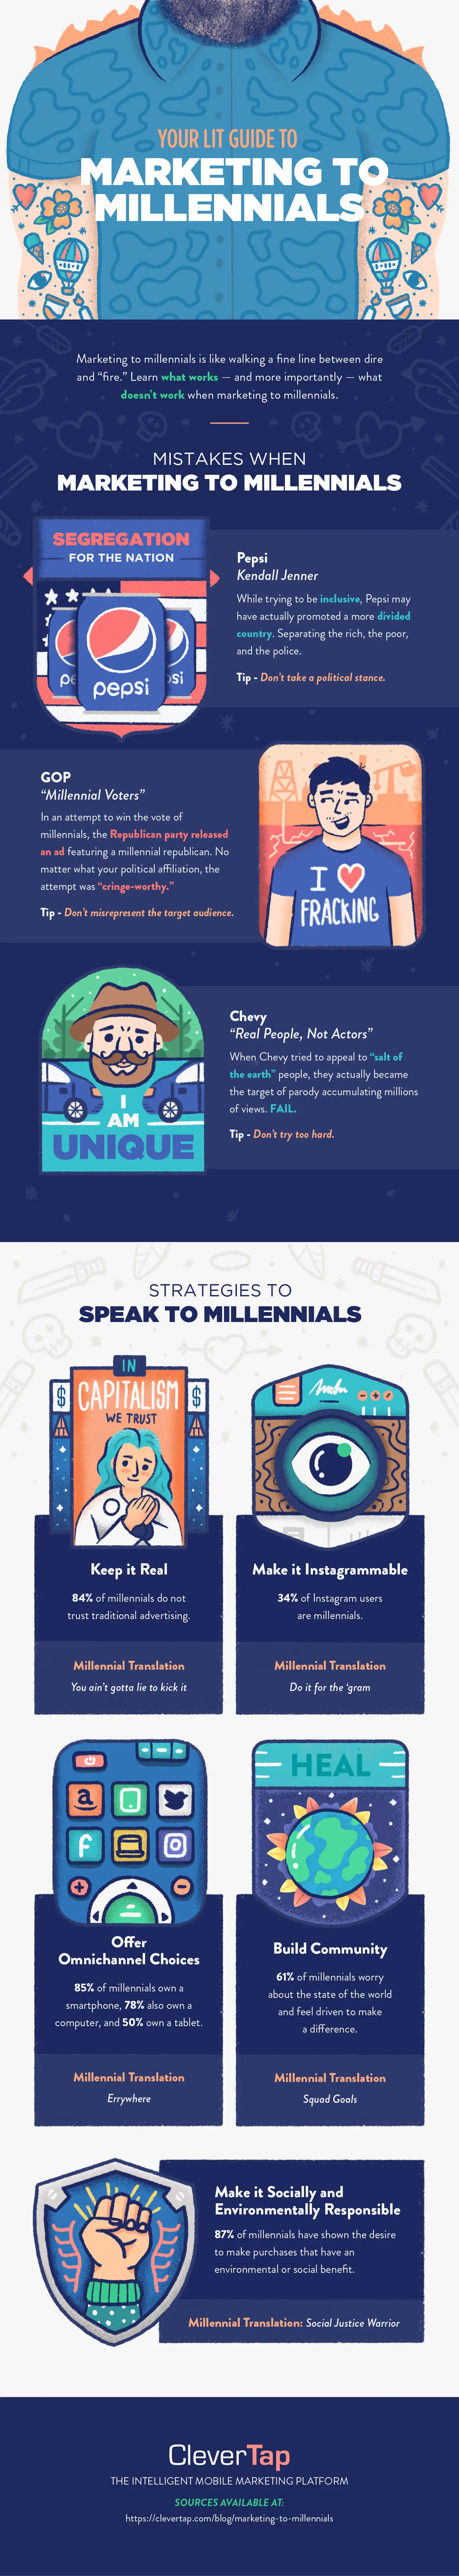 insights_for_marketing_to_millennials_-_infographic.jpg